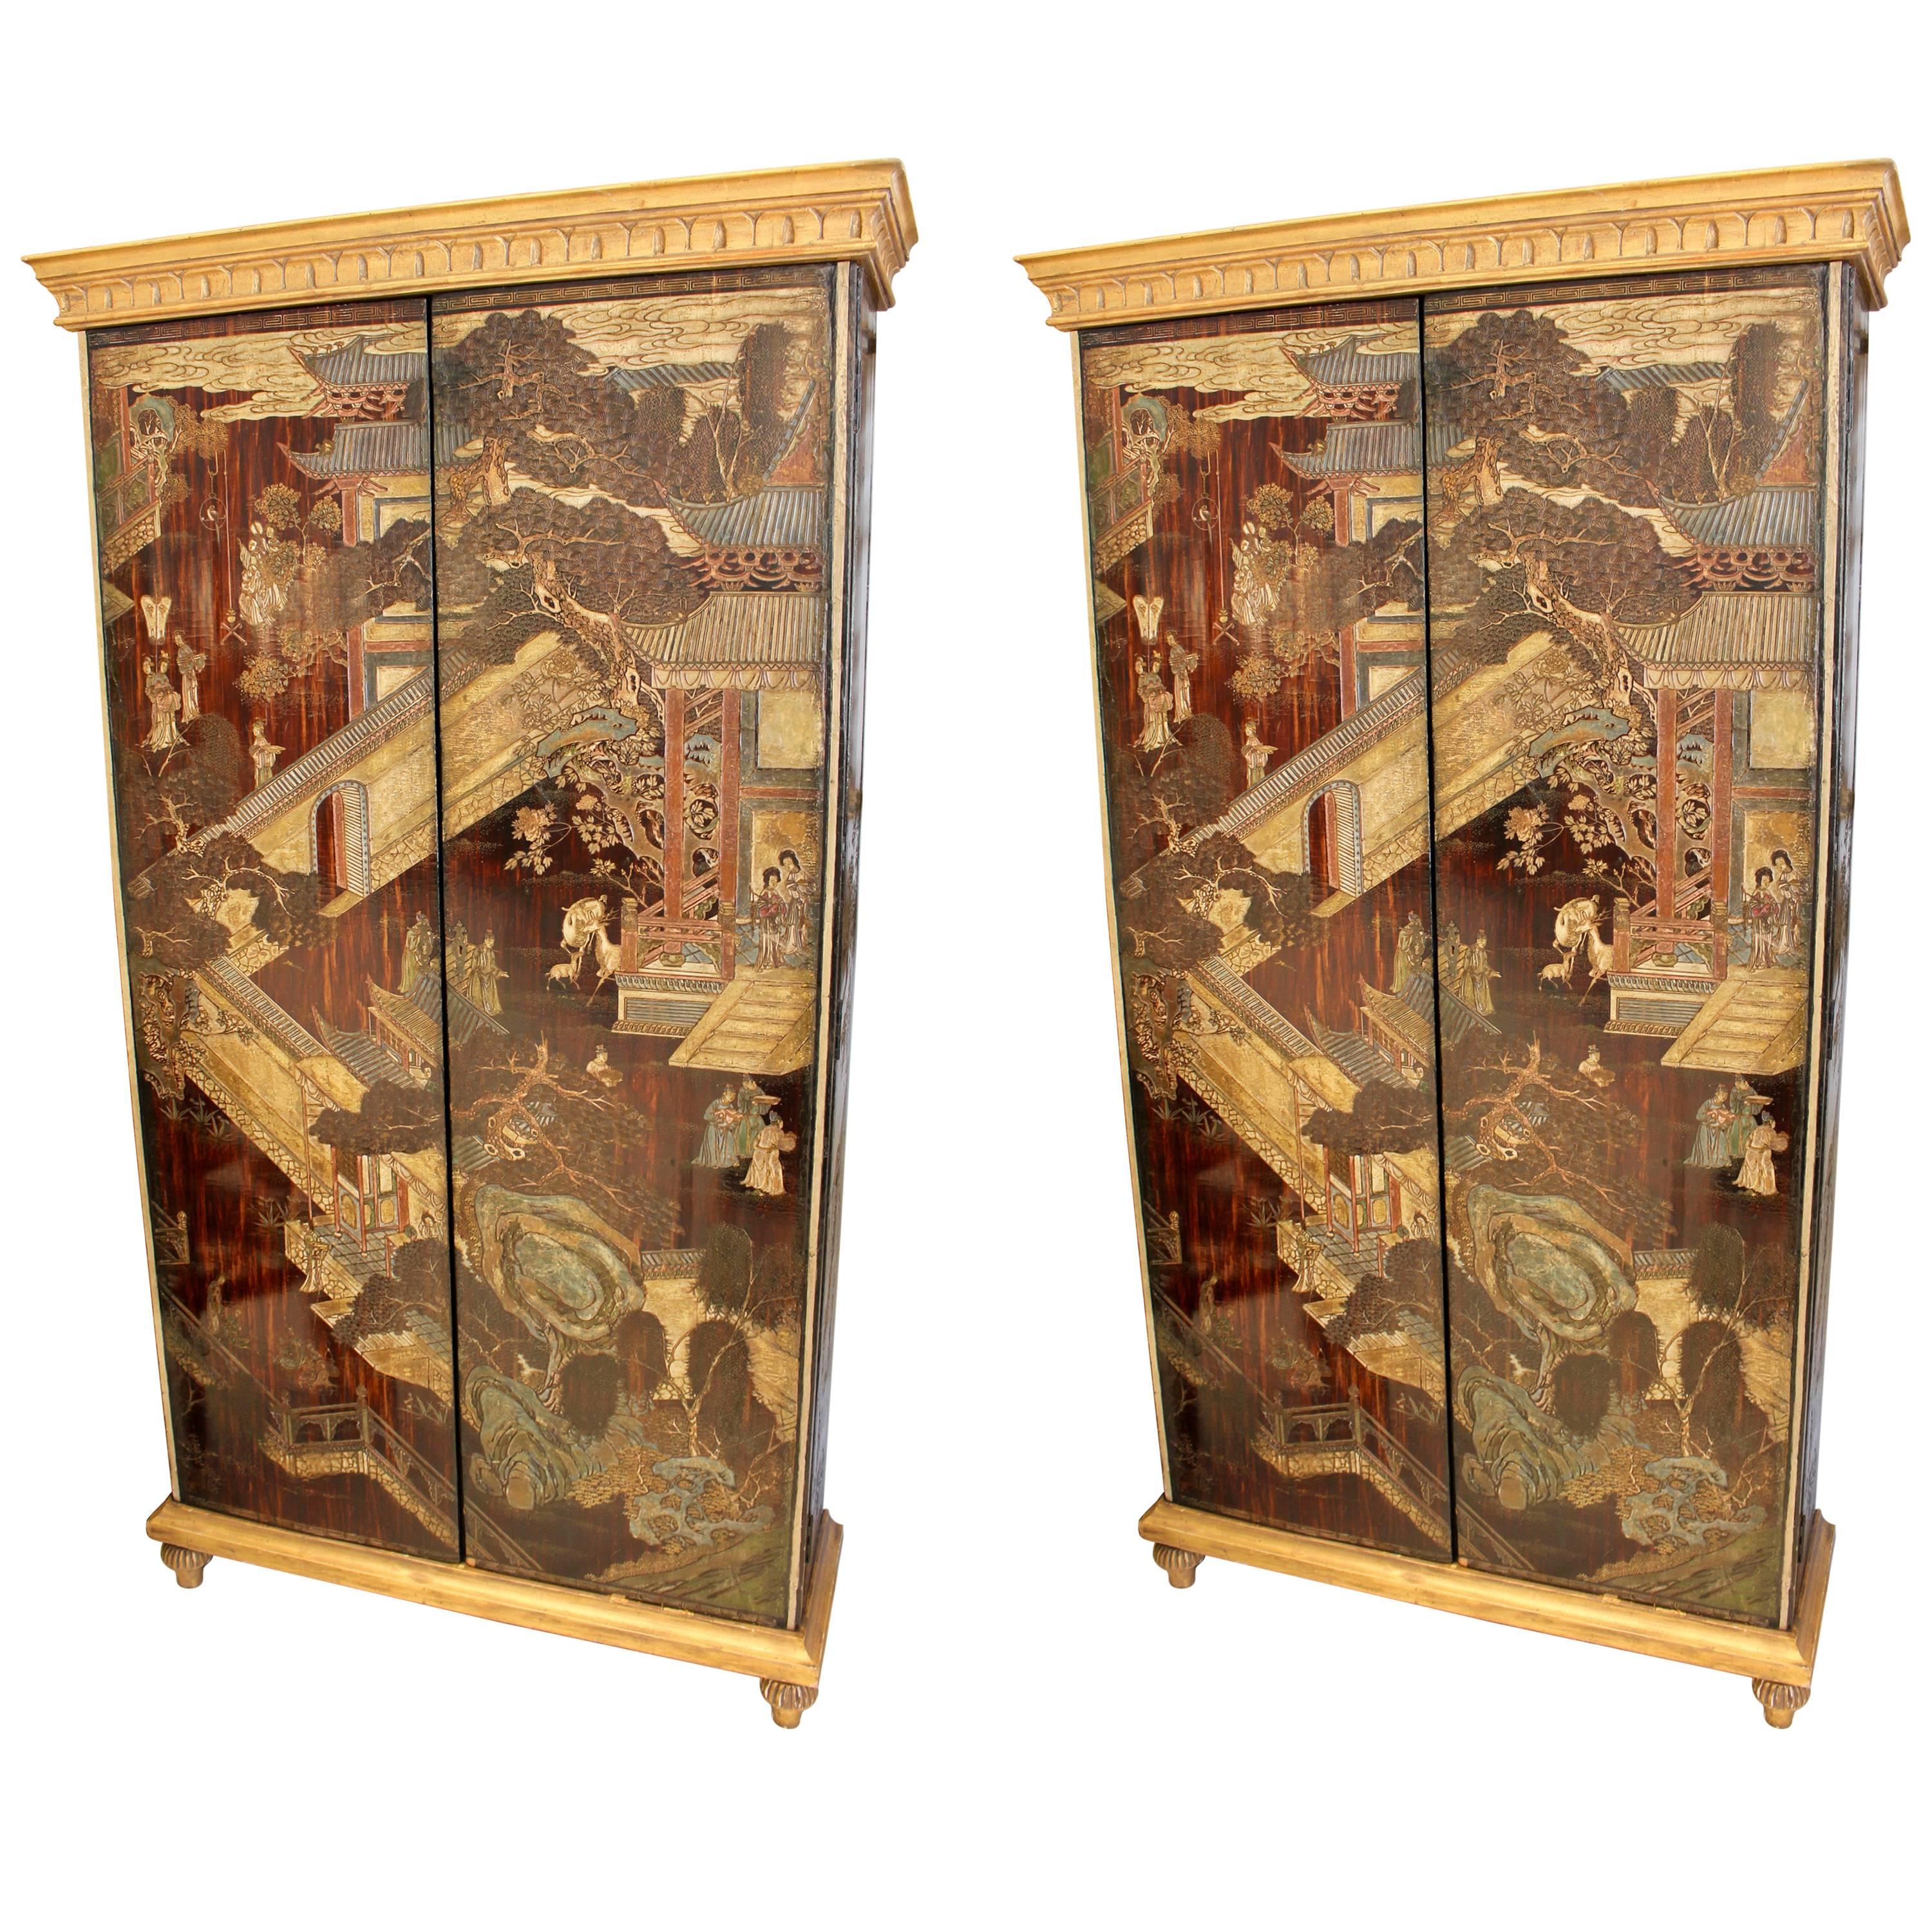 Pair of Chinese Carved Coromandel and Parcel-Gilt Cupboards